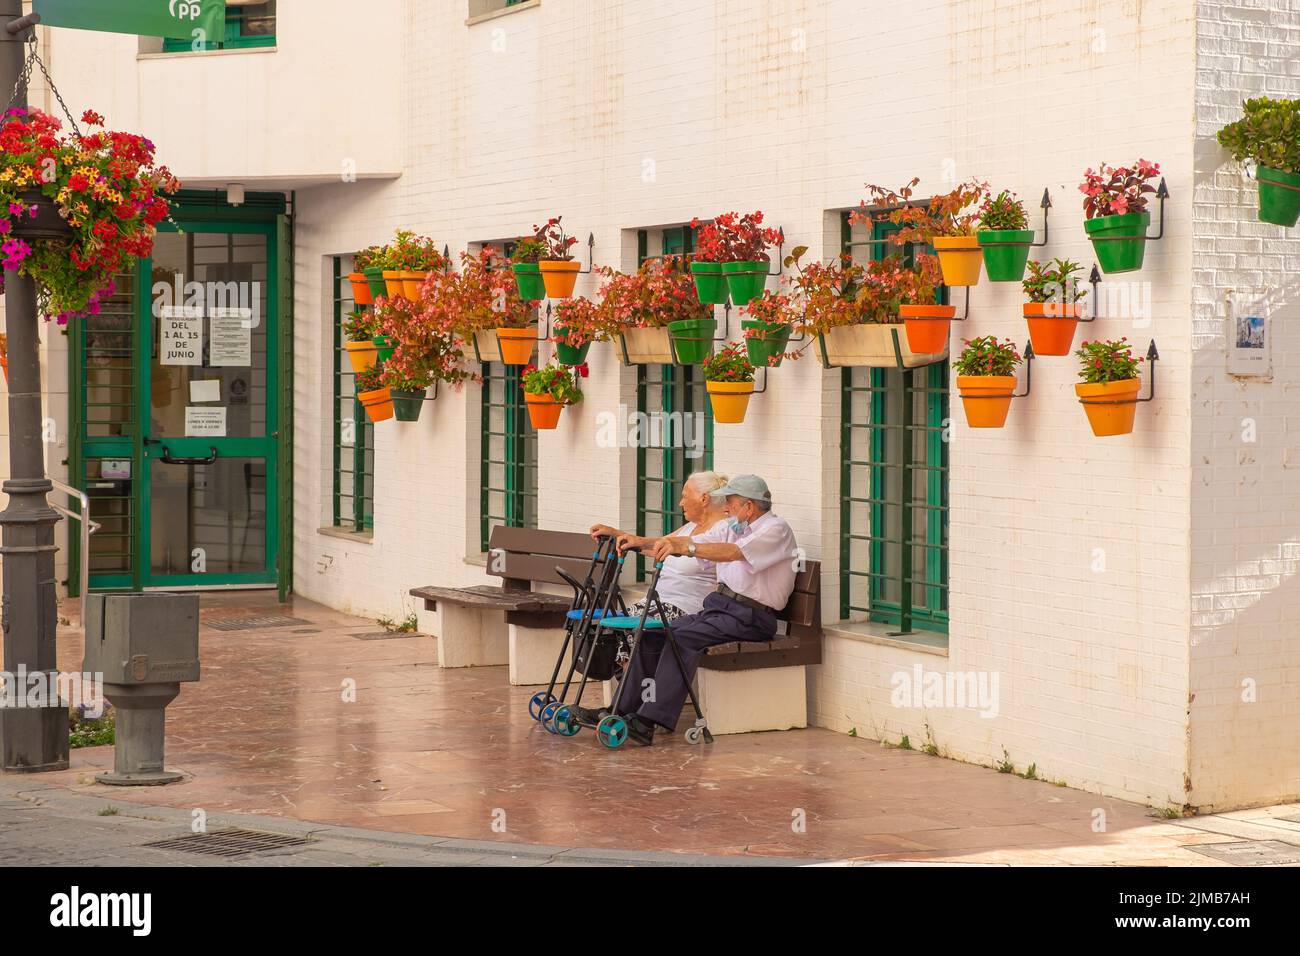 Elderly couple sitting on a bench in in a pedestrian street full of colorful flowers in pots, typical of Estepona. Old couple, life in retirement Stock Photo